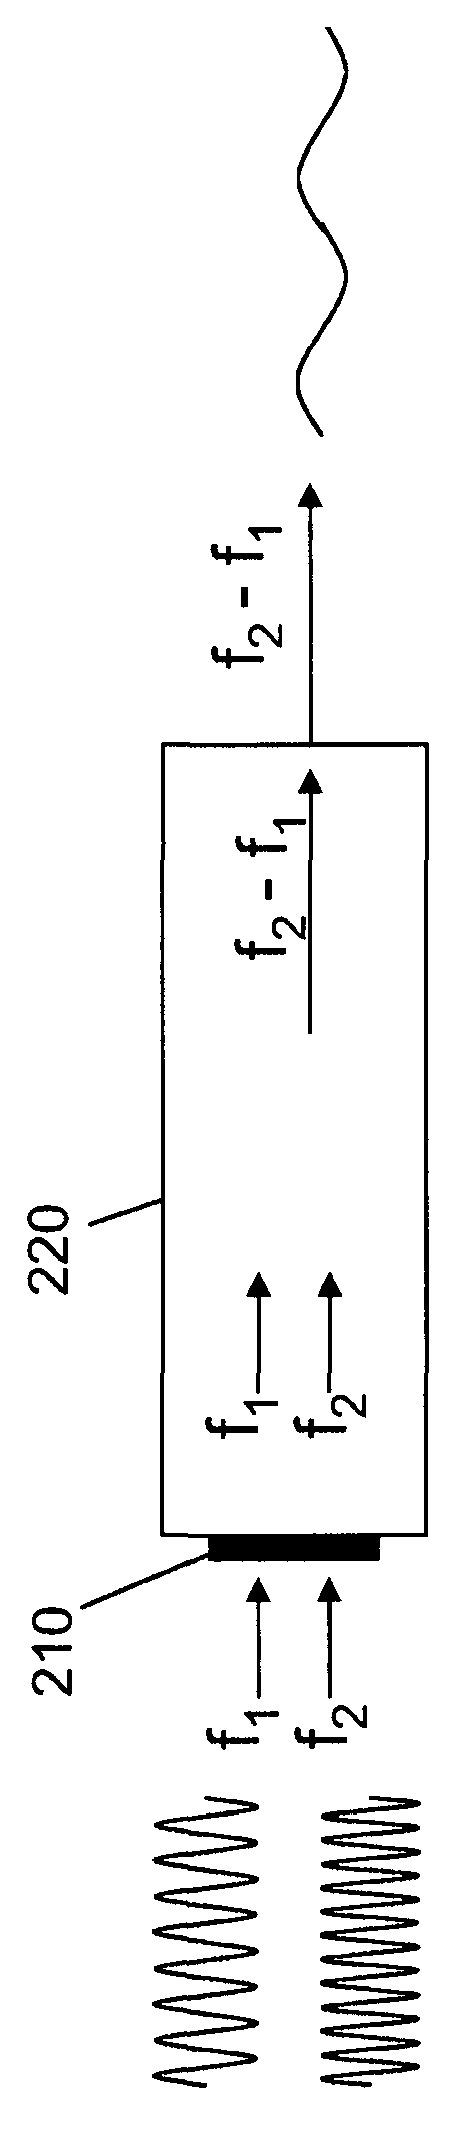 Device and method for generating a beam of acoustic energy from a borehole, and applications thereof